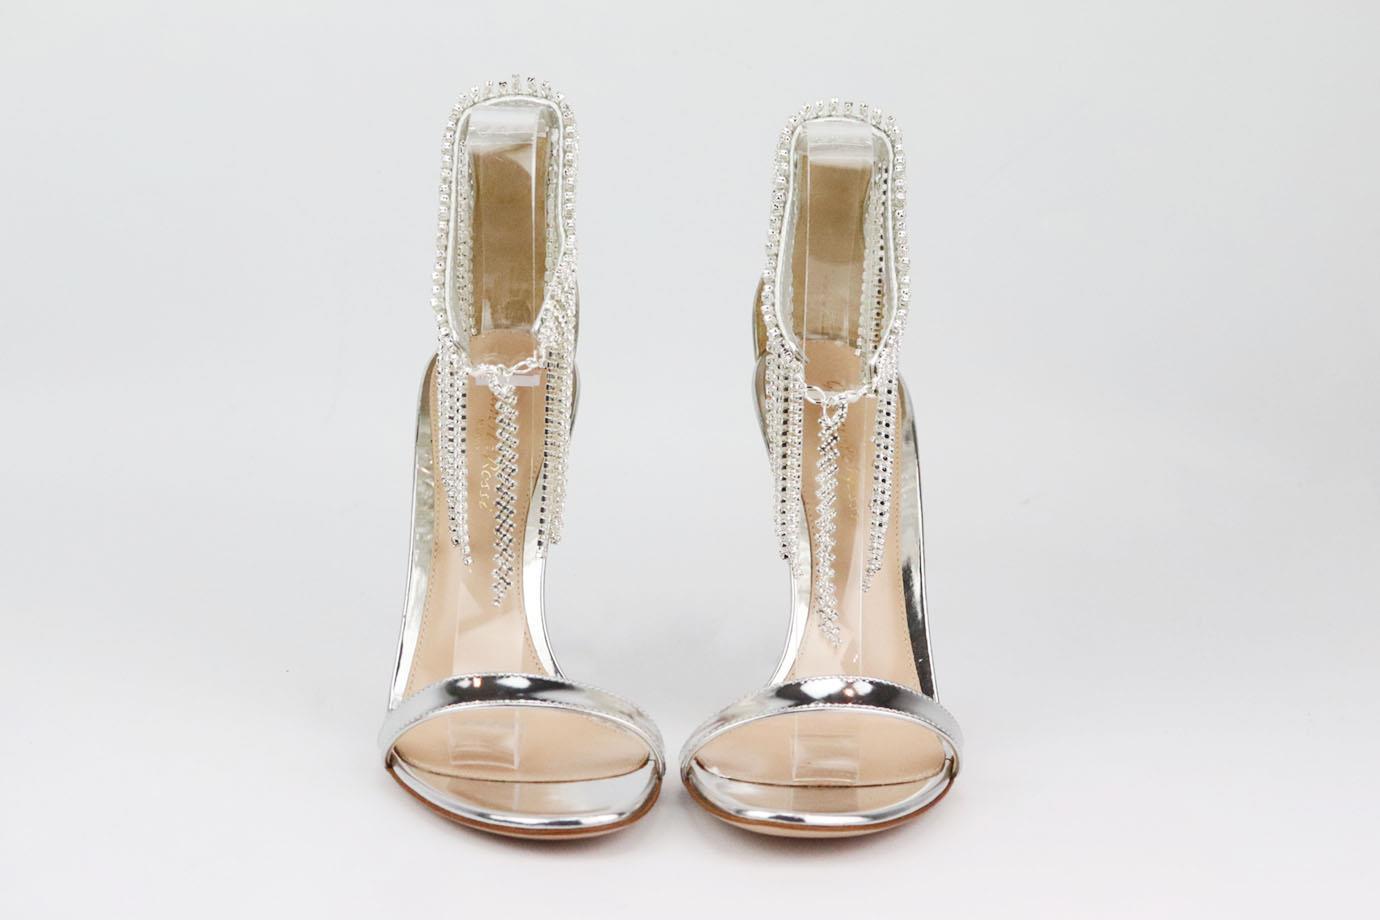 These sandals by Gianvito Rossi have been made in Italy from metallic leather trimmed with swishy crystal fringing around the ankle strap. Heel measures approximately 83mm/ 3.5 inches. Metallic leather. Lobster clasp fastening at front. Does not